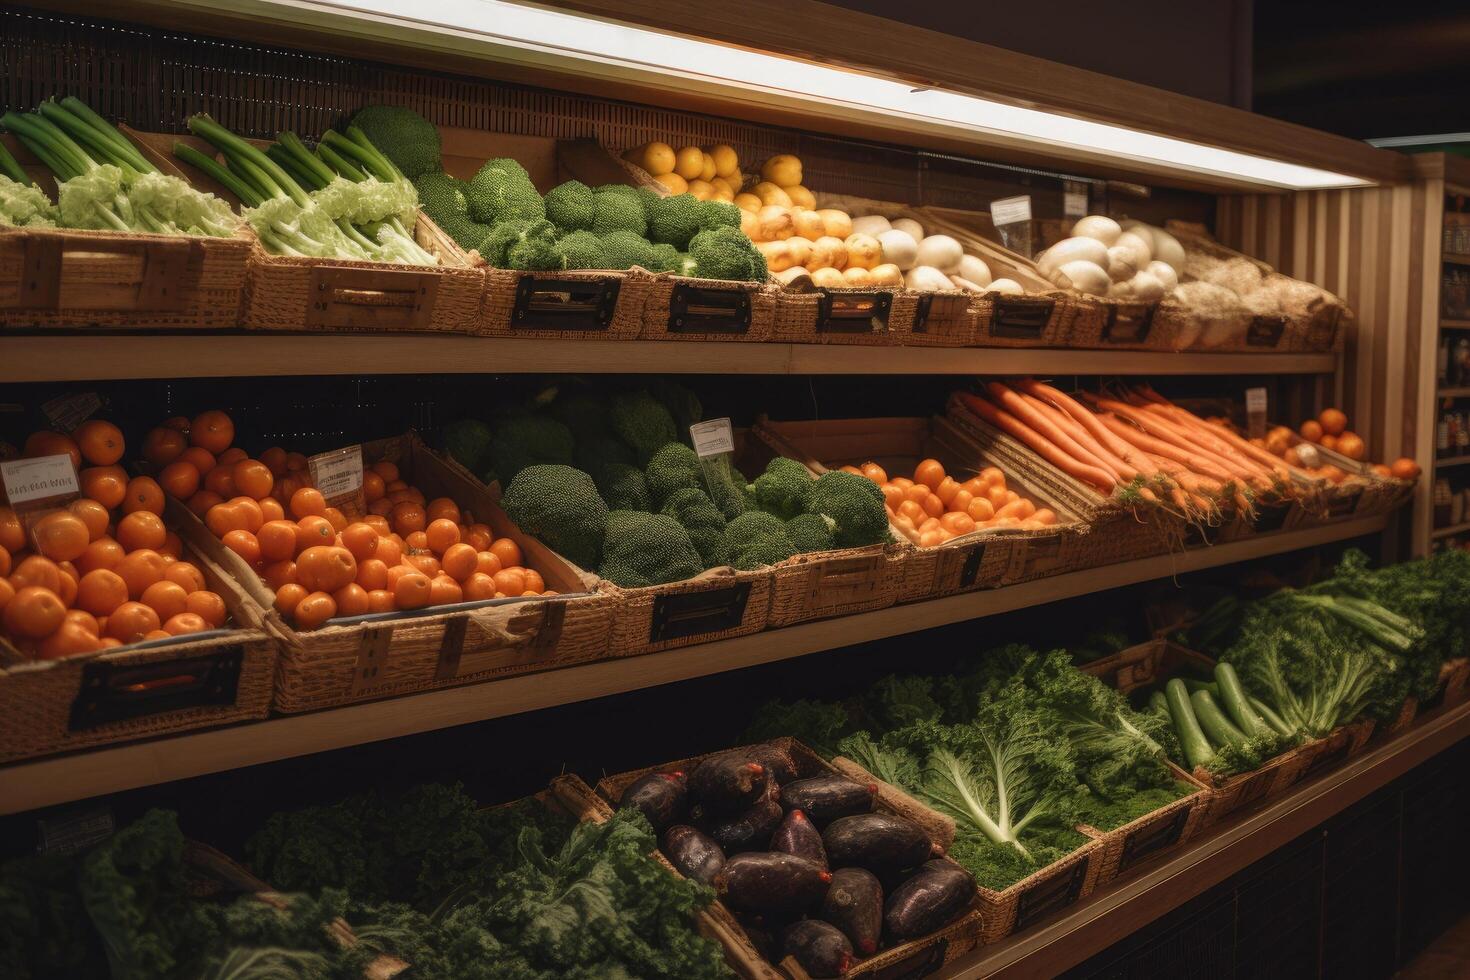 Fruits and vegetables on shelves in supermarket. Grocery store. Grocery and vegetable shelves in the supermarket, photo